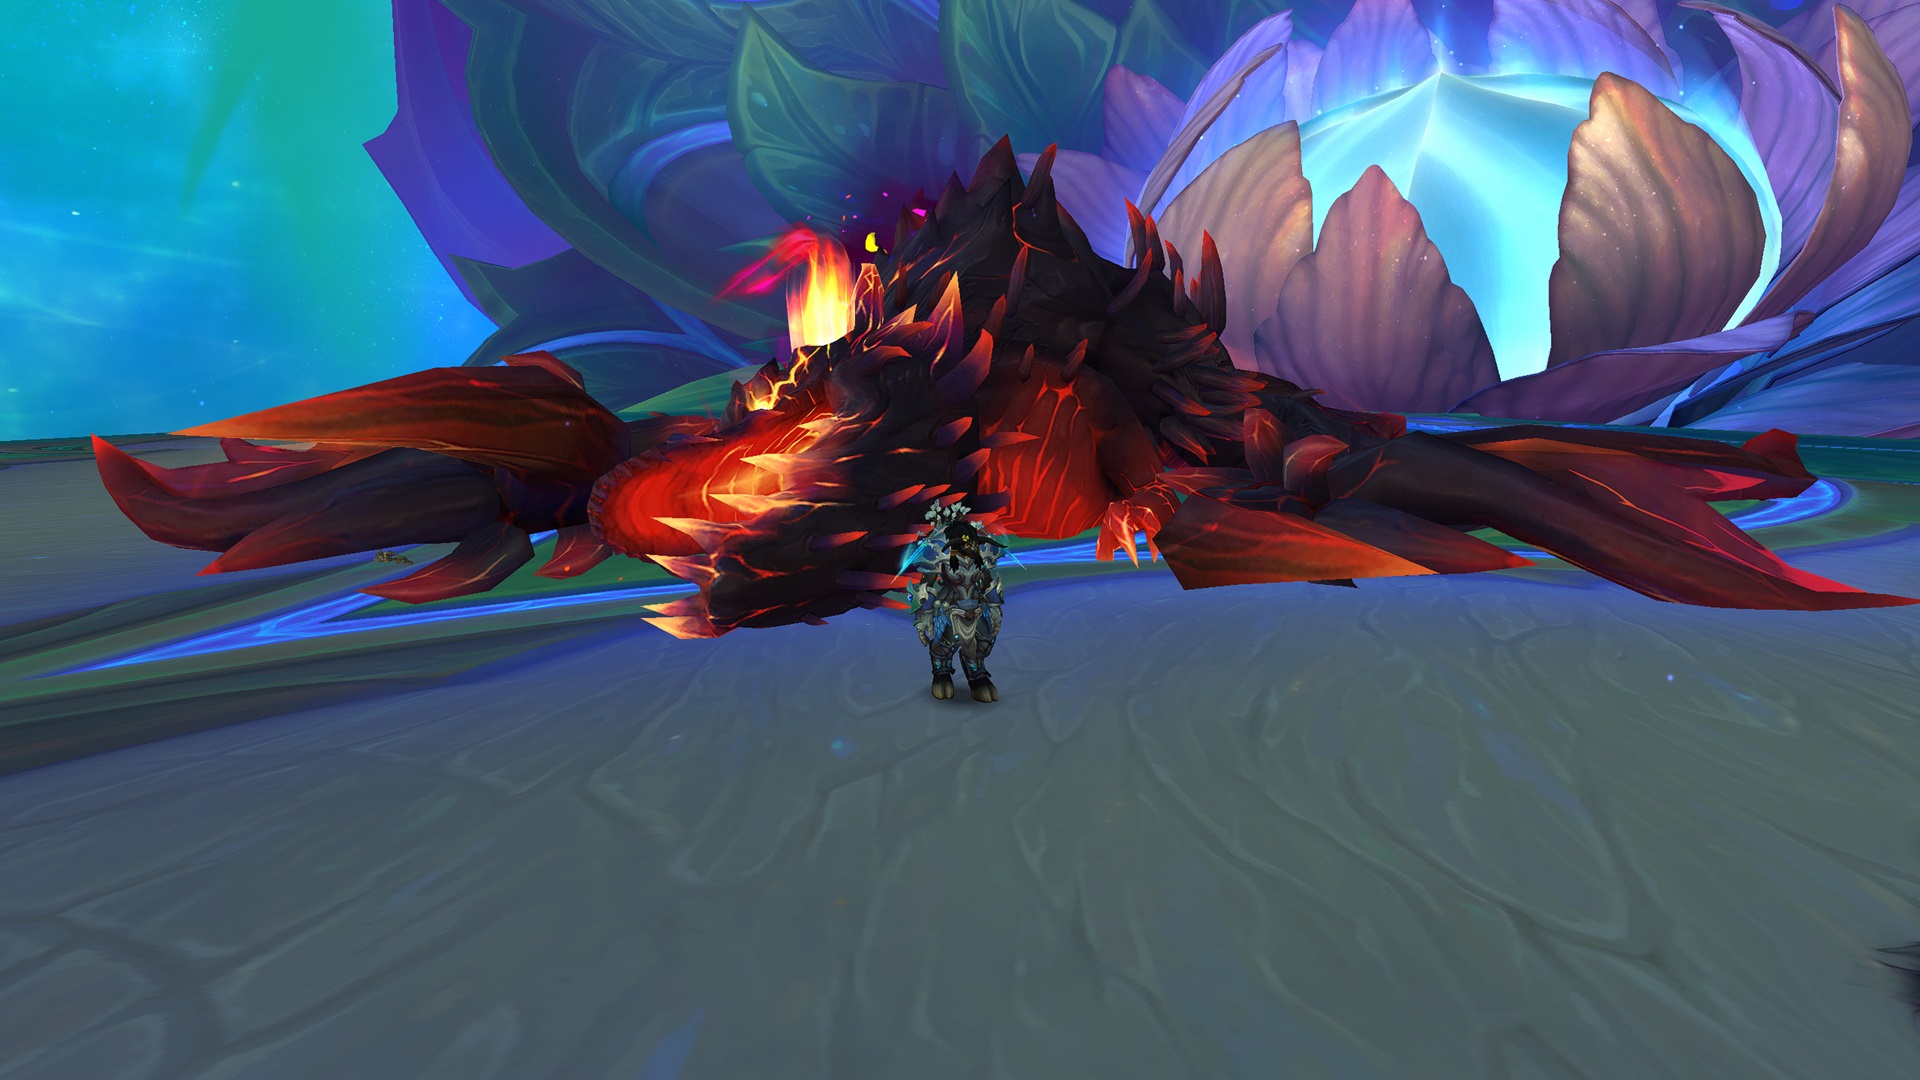 A Tauren Paladin standing in front of the dragon Fyrakk after his defeat